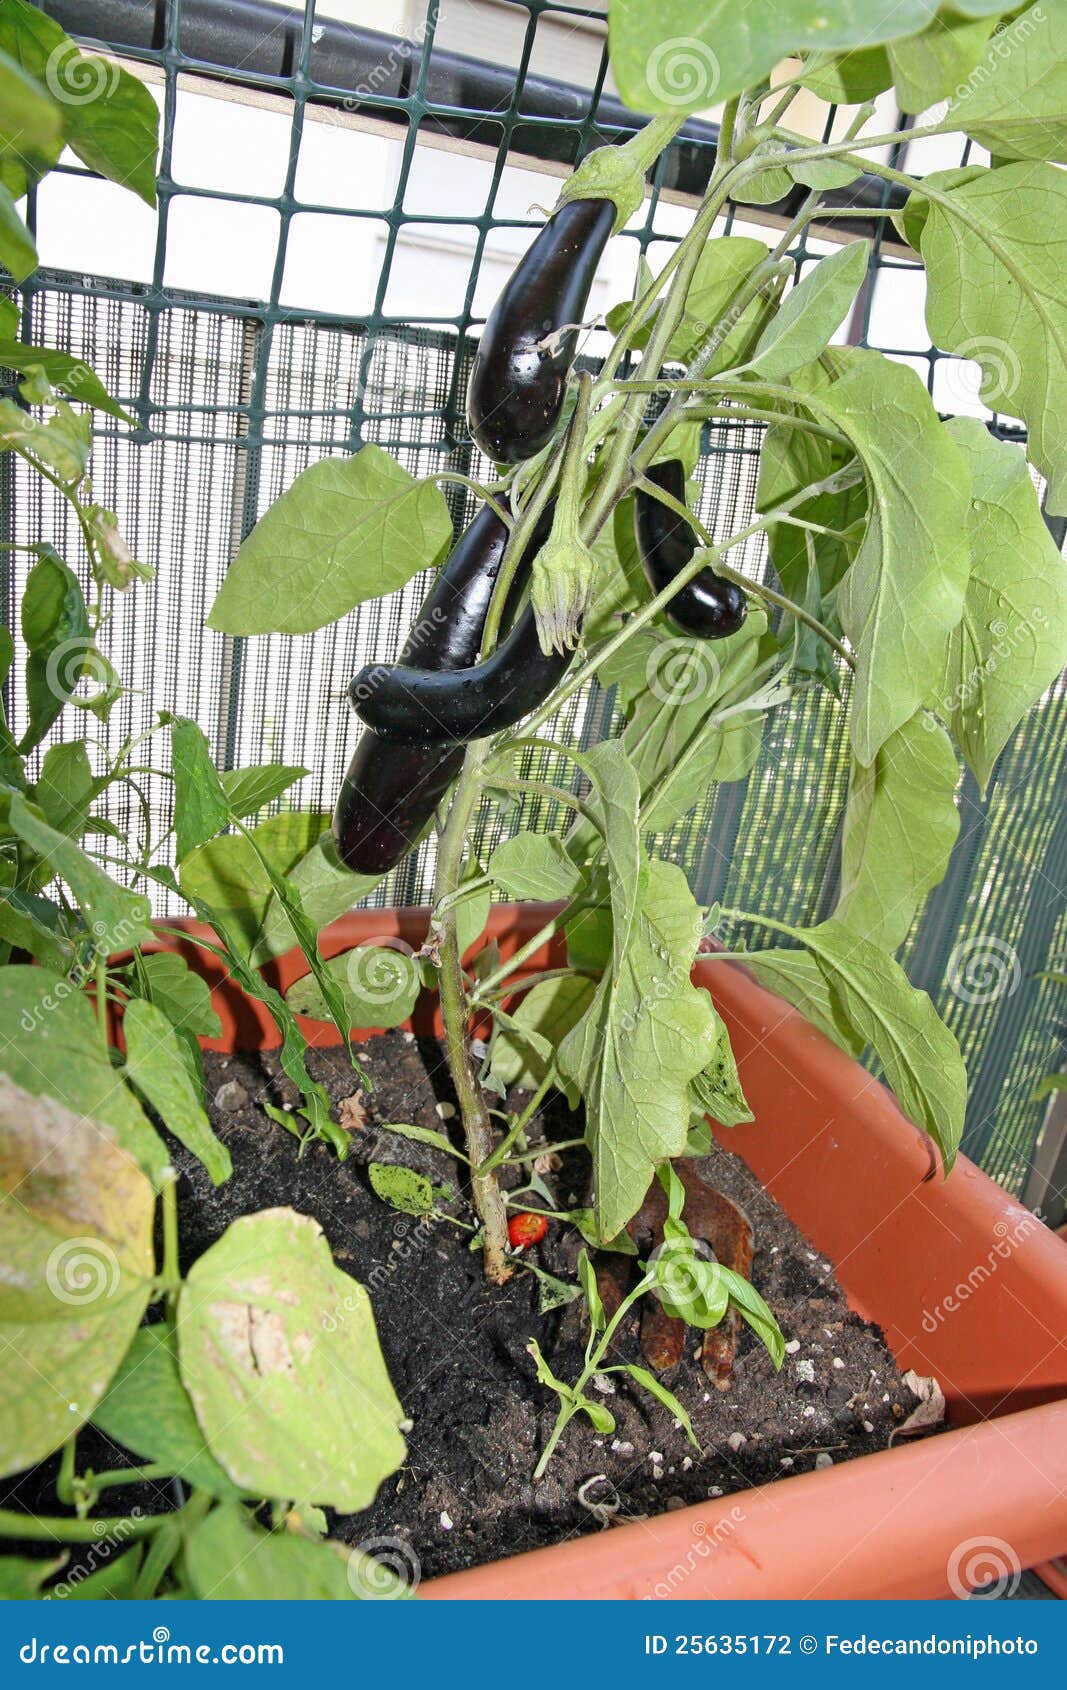 eggplant grown in a pot on the terrace of a house